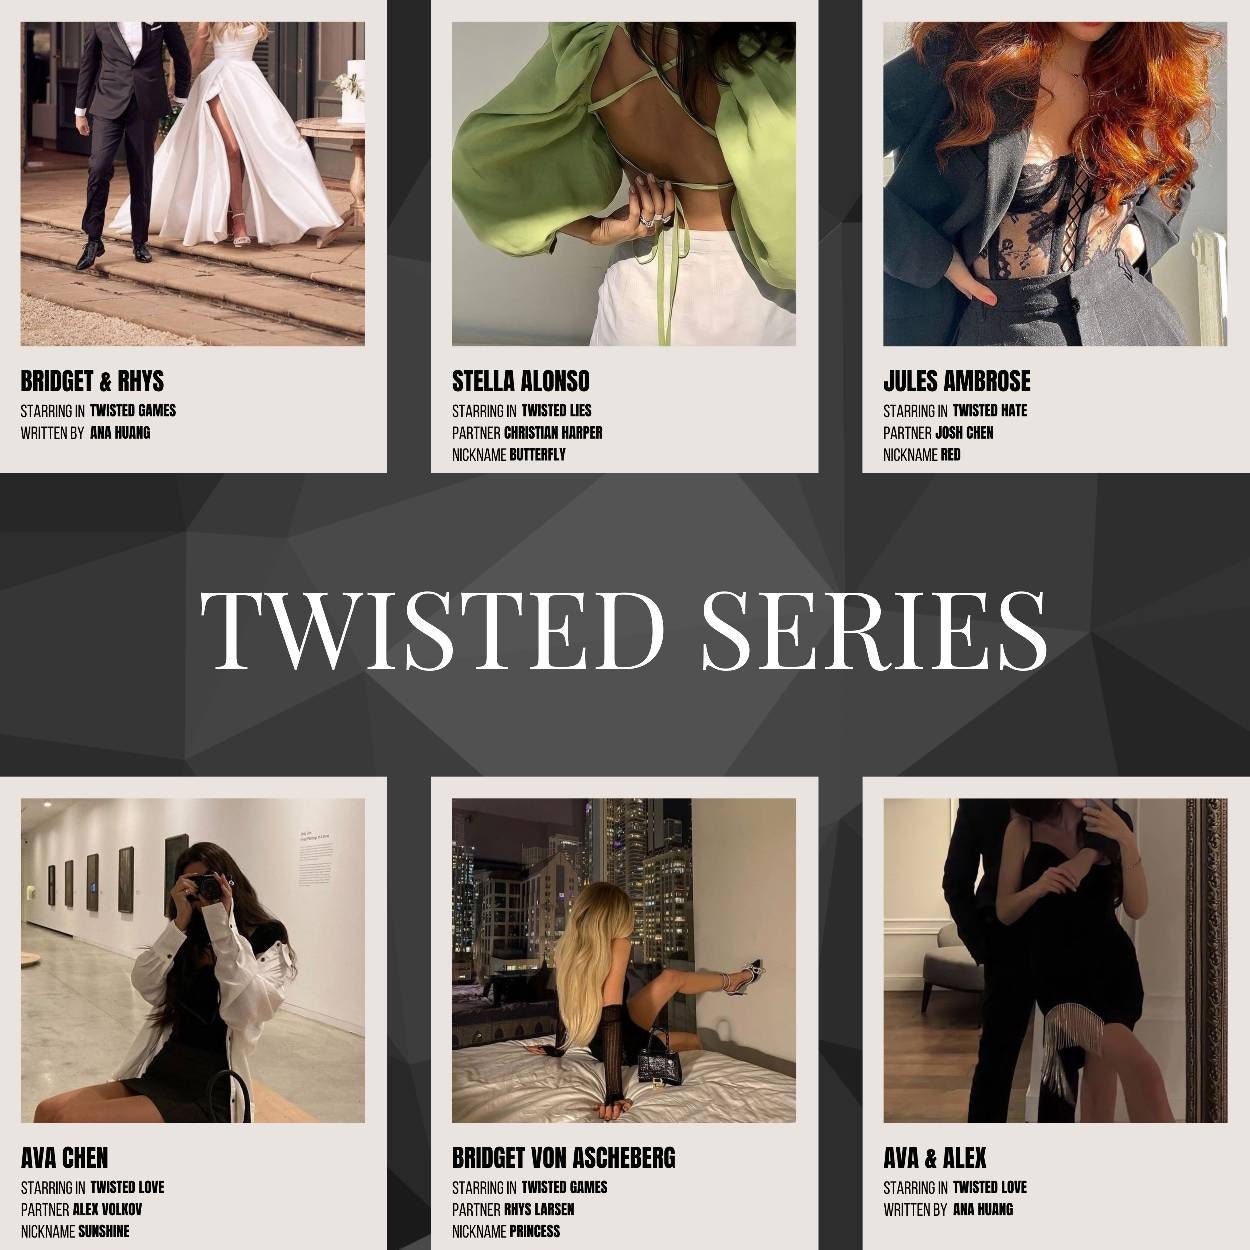 Twisted Hate Movie Poster  Book posters, Twisted series